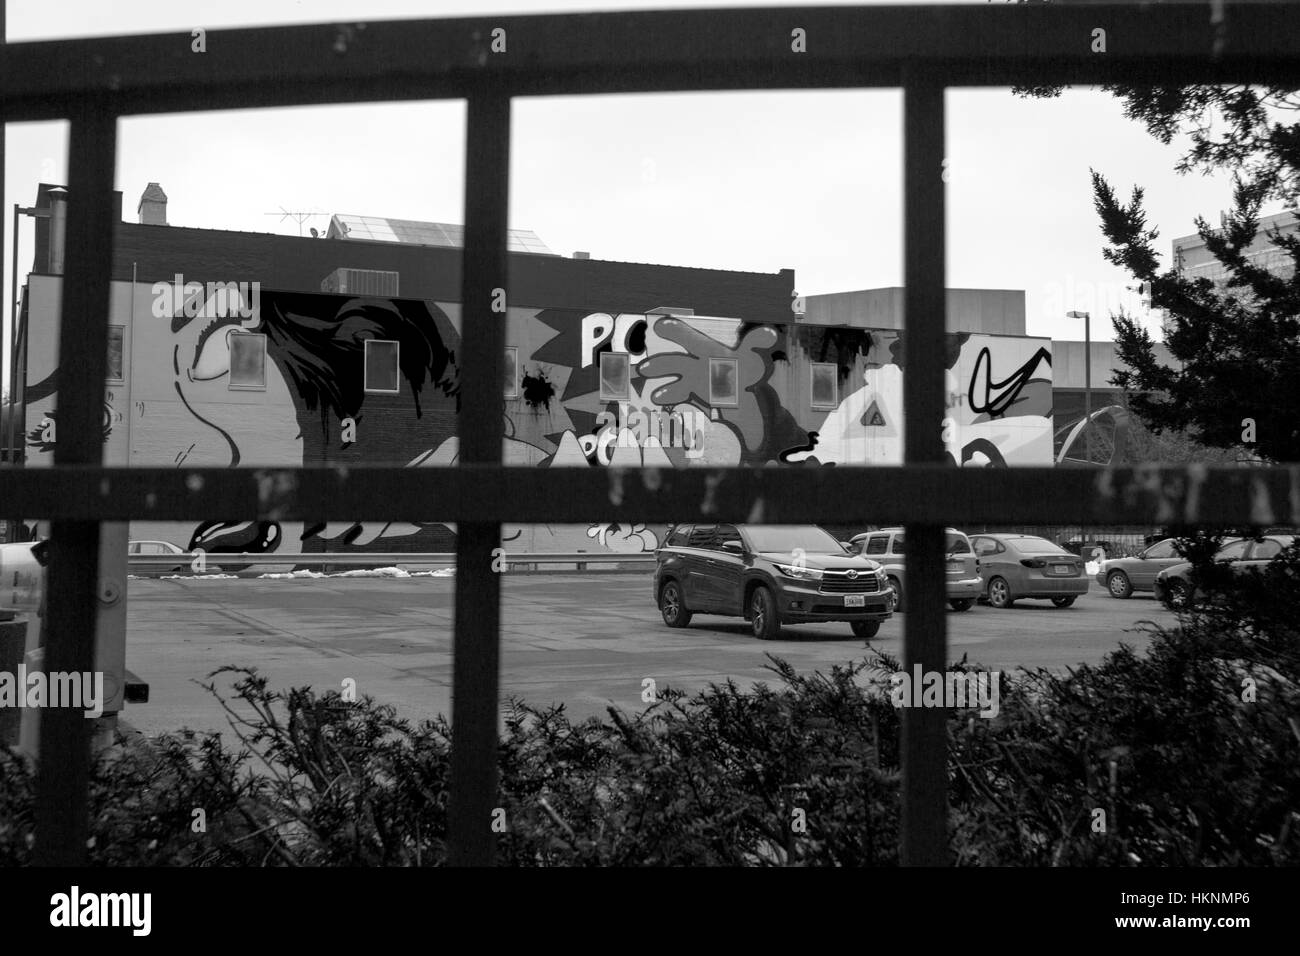 Des Moines, USA, 28 January 2017. Art behind bars-Graffiti art on a building wall in black and white behind bars in the foreground following news that Donald Trump may defund the National Endowment for the Arts. Cynthia Hanevy/Alamy Live News Stock Photo